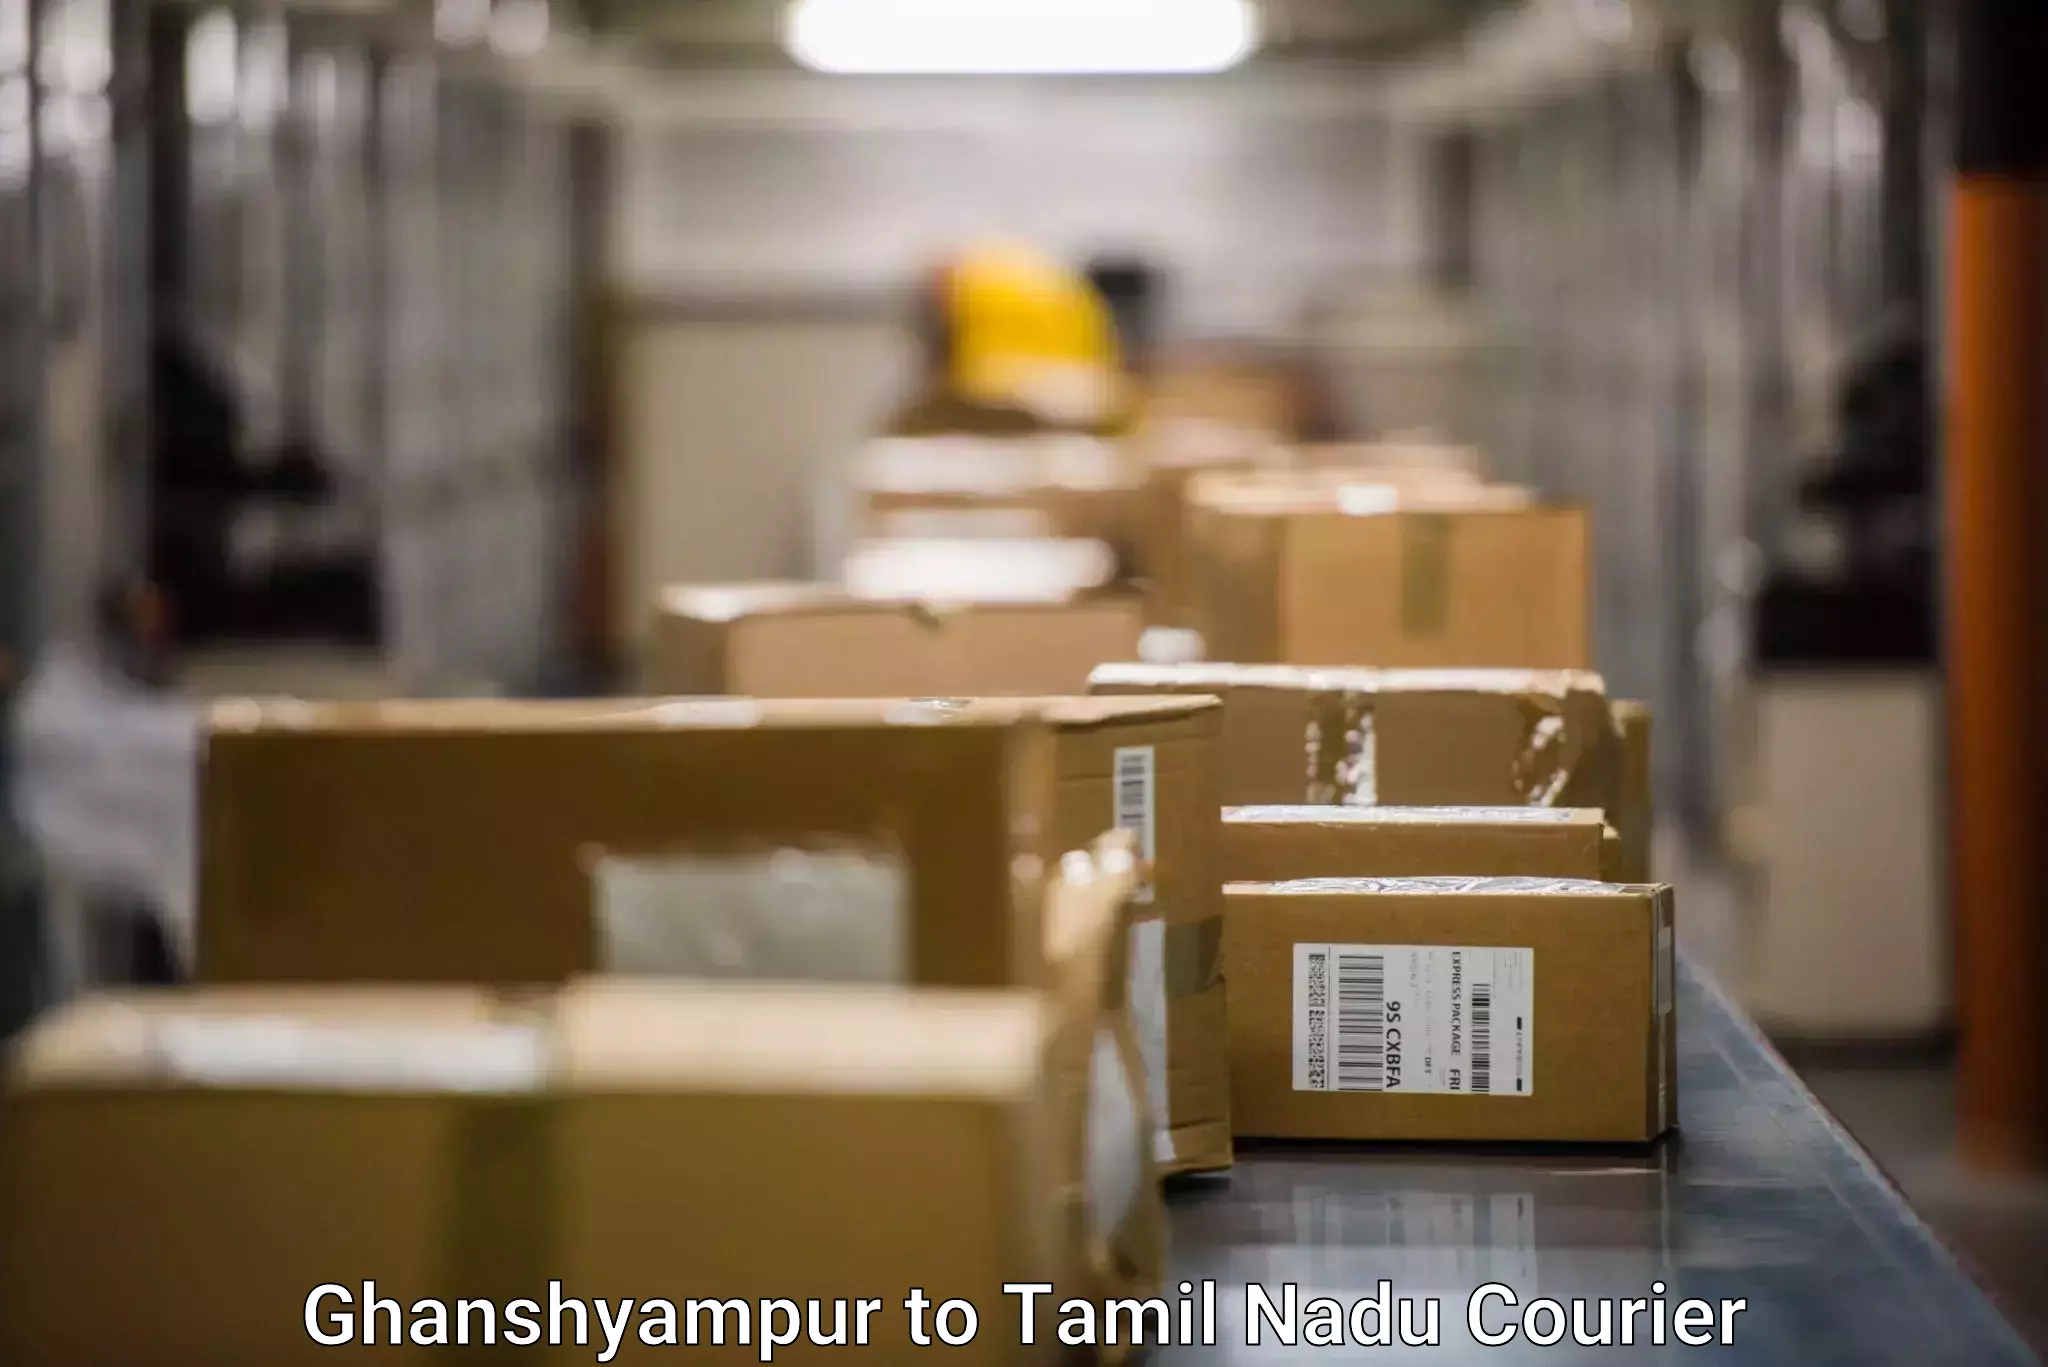 Global courier networks Ghanshyampur to Avinashi